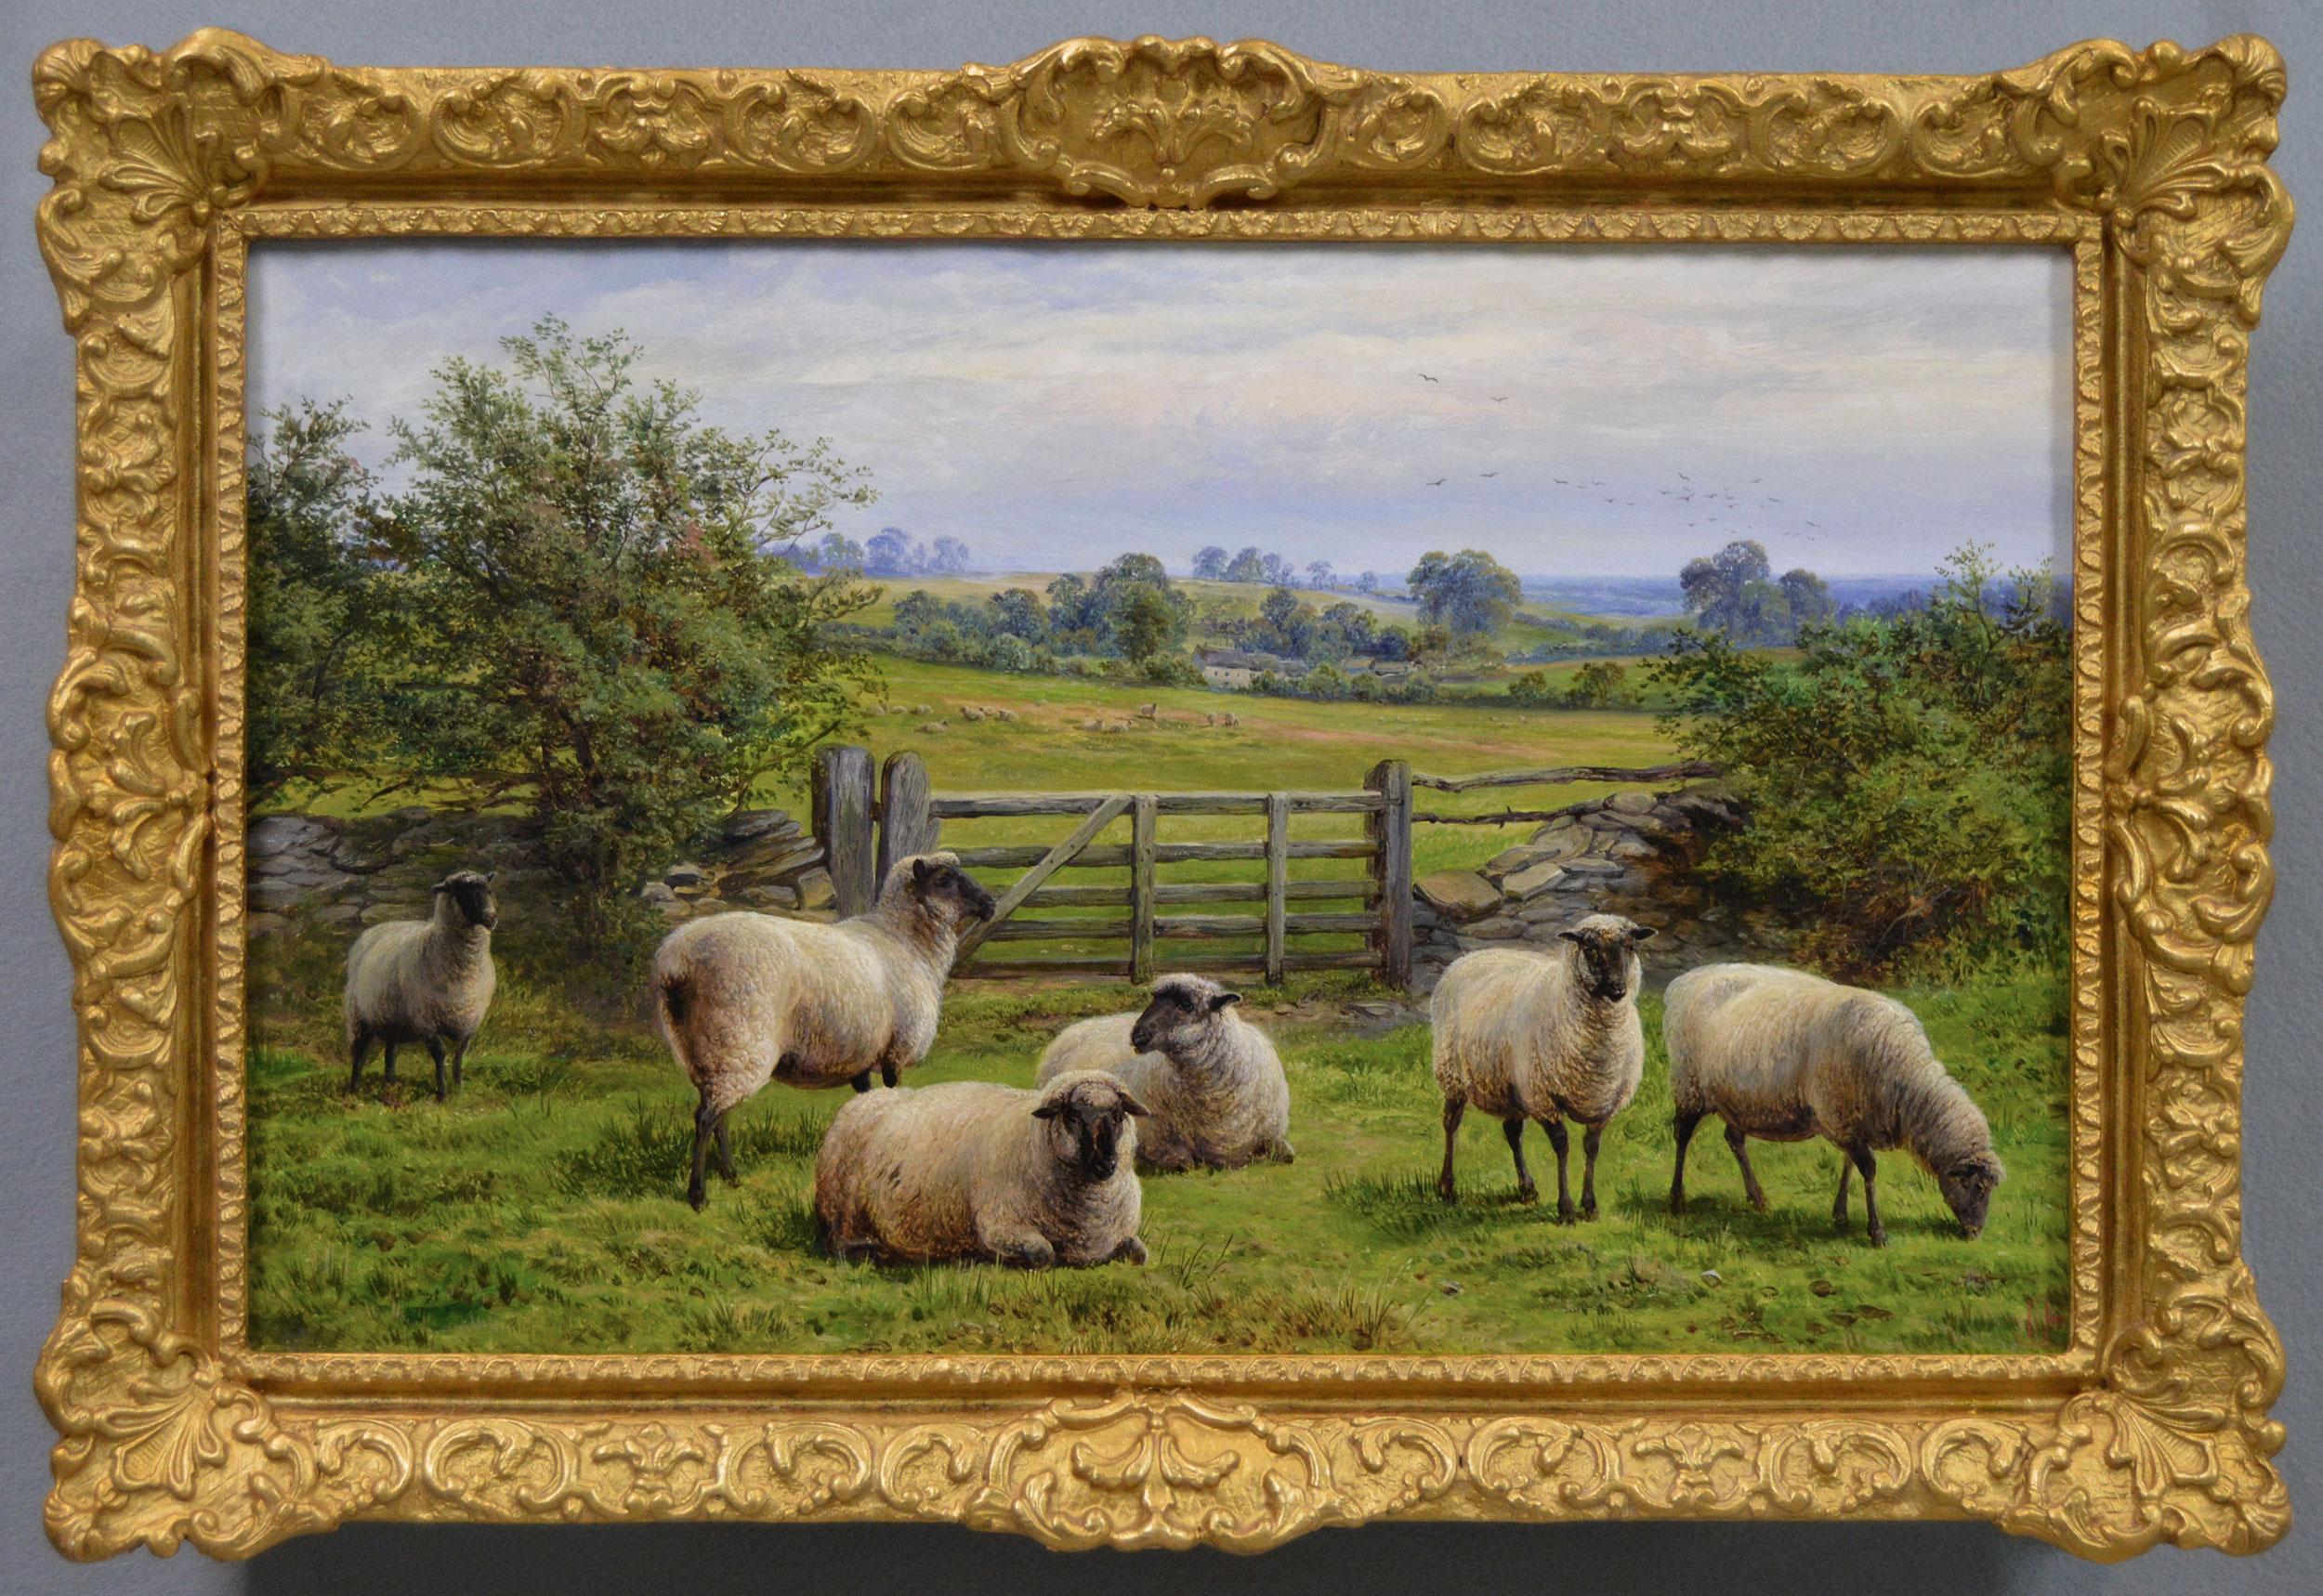 Charles Jones (b.1836) Landscape Painting - 19th Century landscape oil painting of sheep near a five bar gate